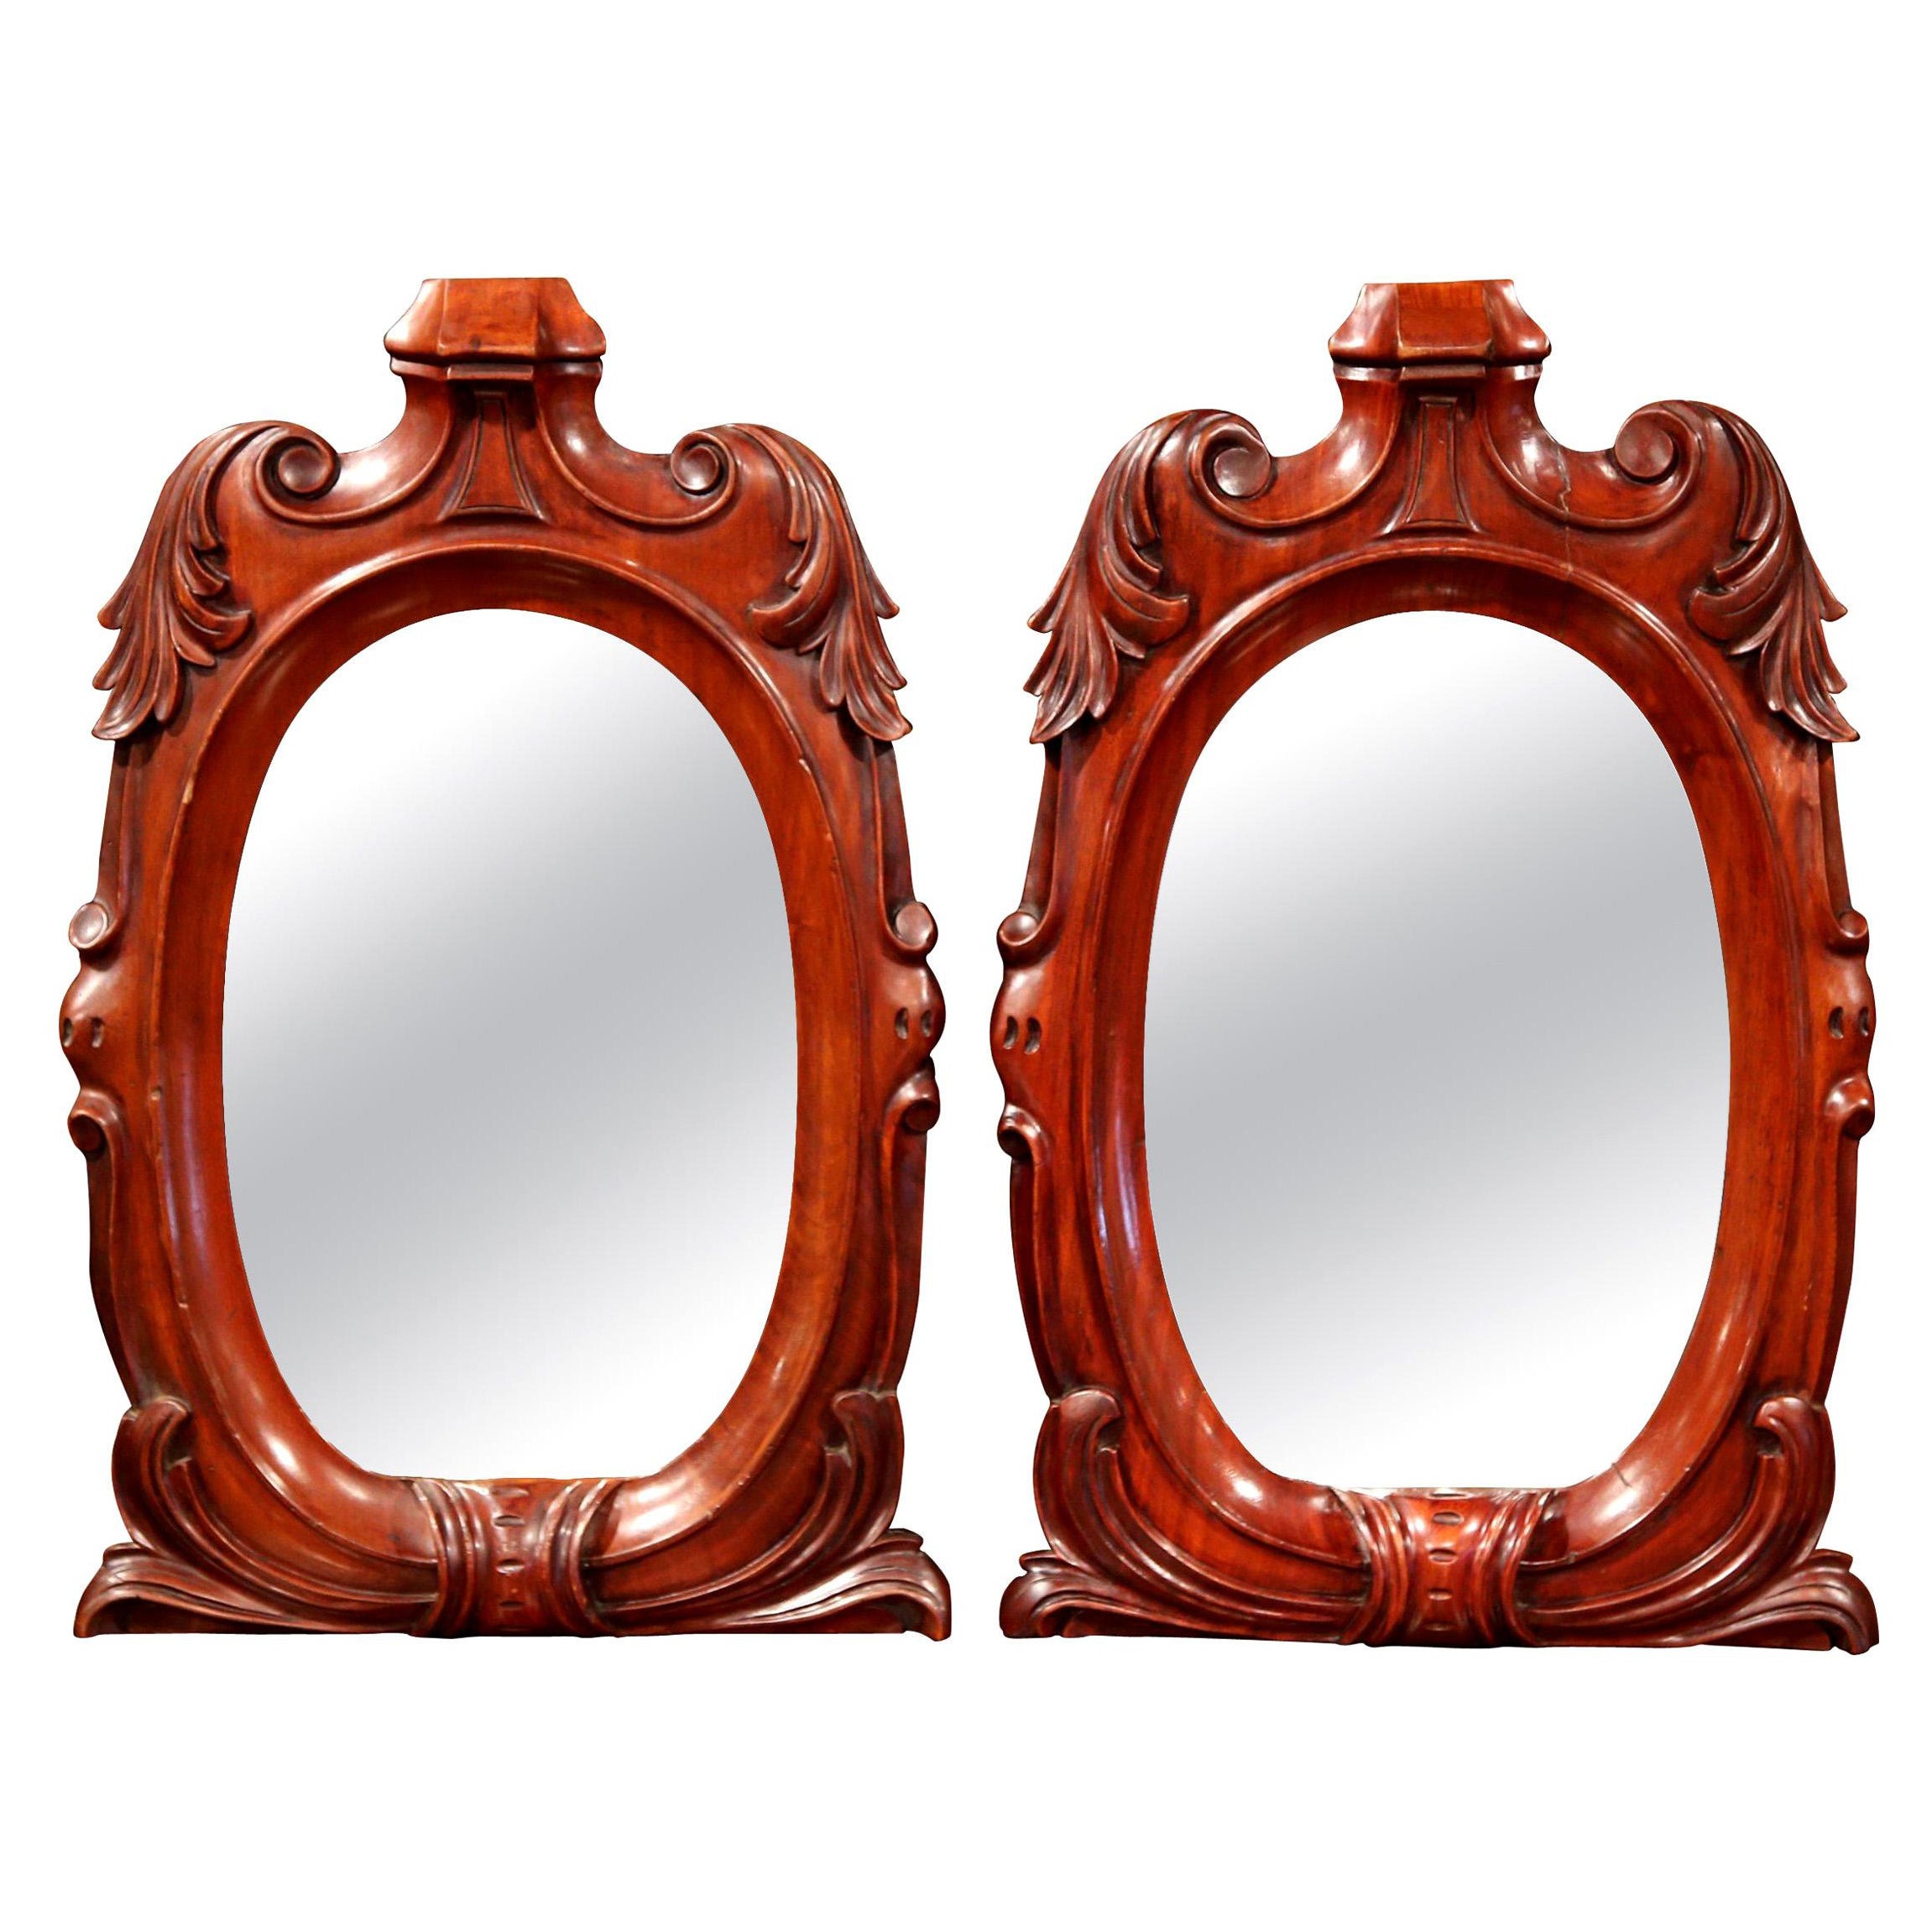 Pair of 19th Century French Regency Hand Carved Mahogany Wall Mirrors